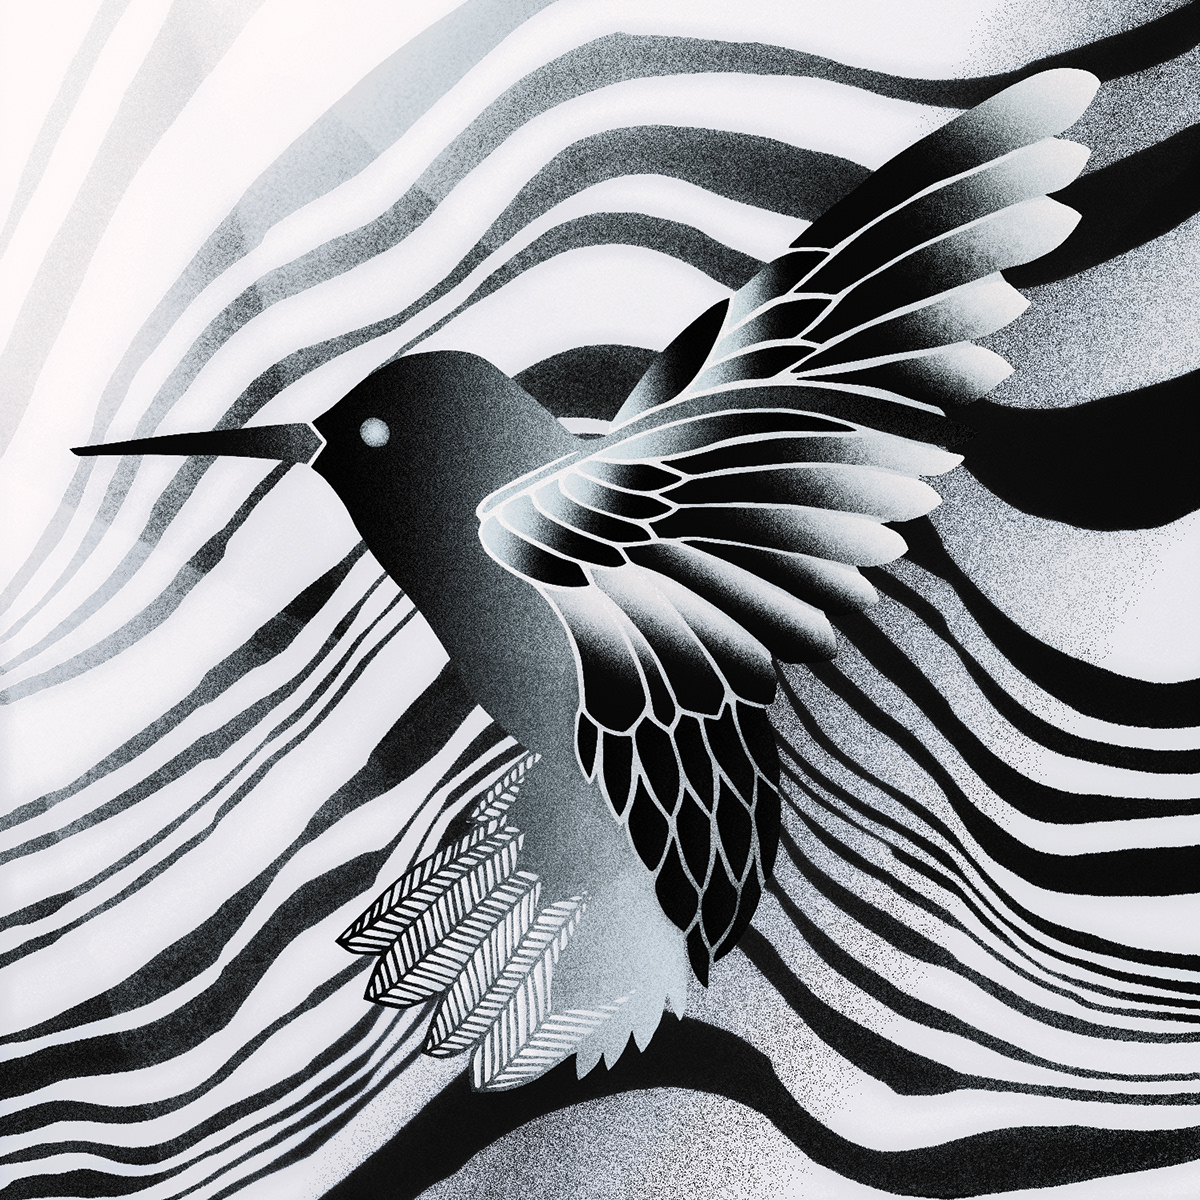 animals bird black and white feathers graphic graphic design  ILLUSTRATION  psychedelic silver waves